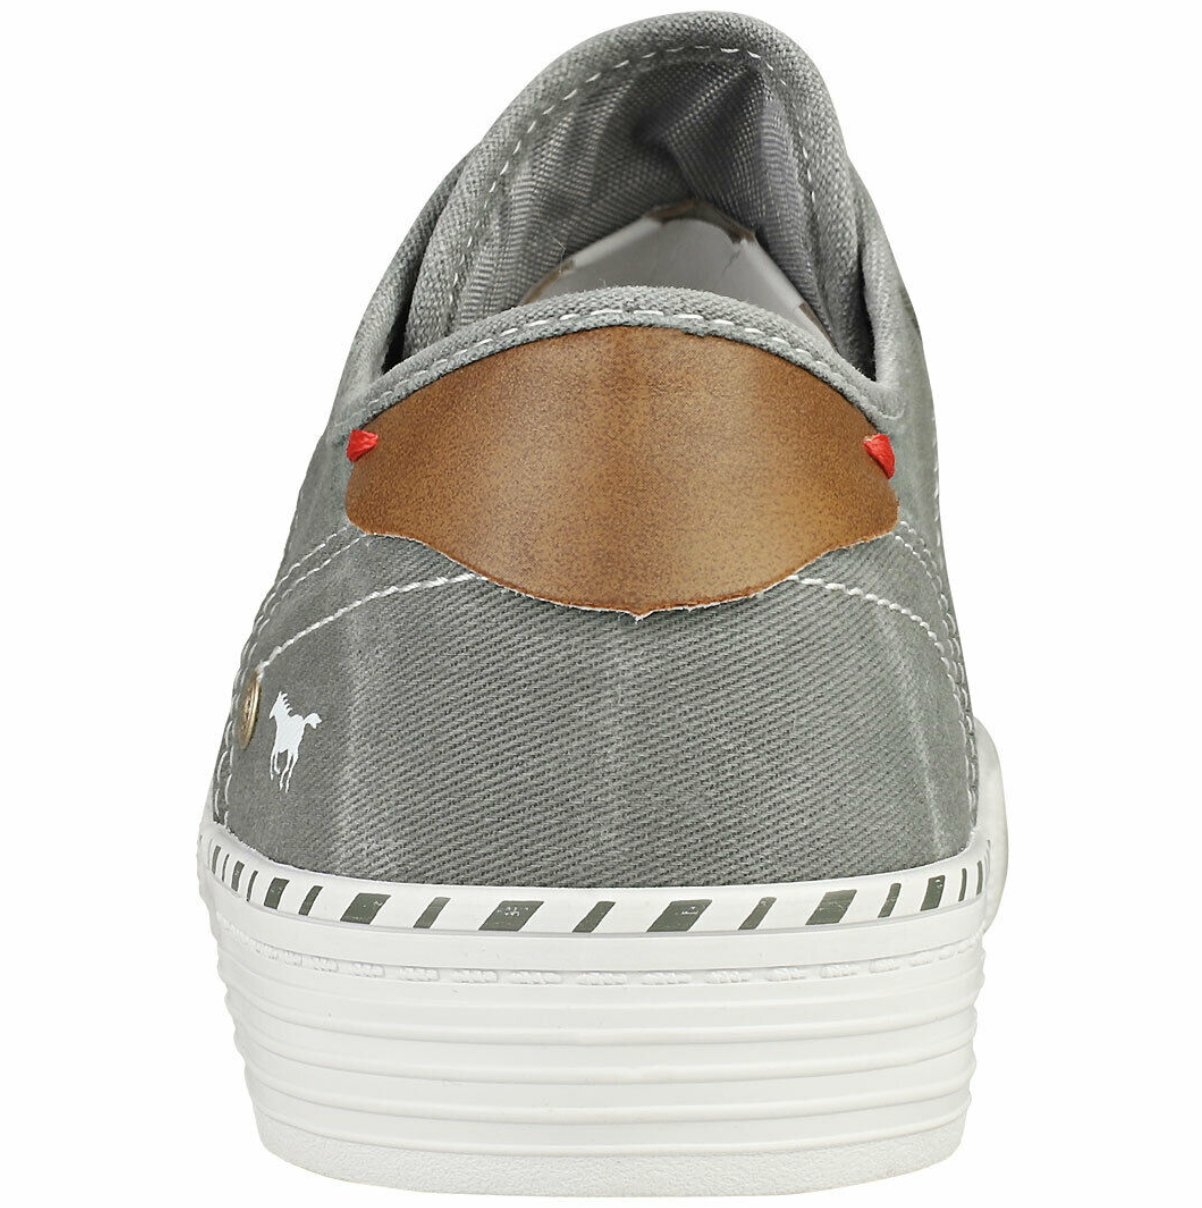 Mustang Womens No Lace Slip On Trainers - Grey